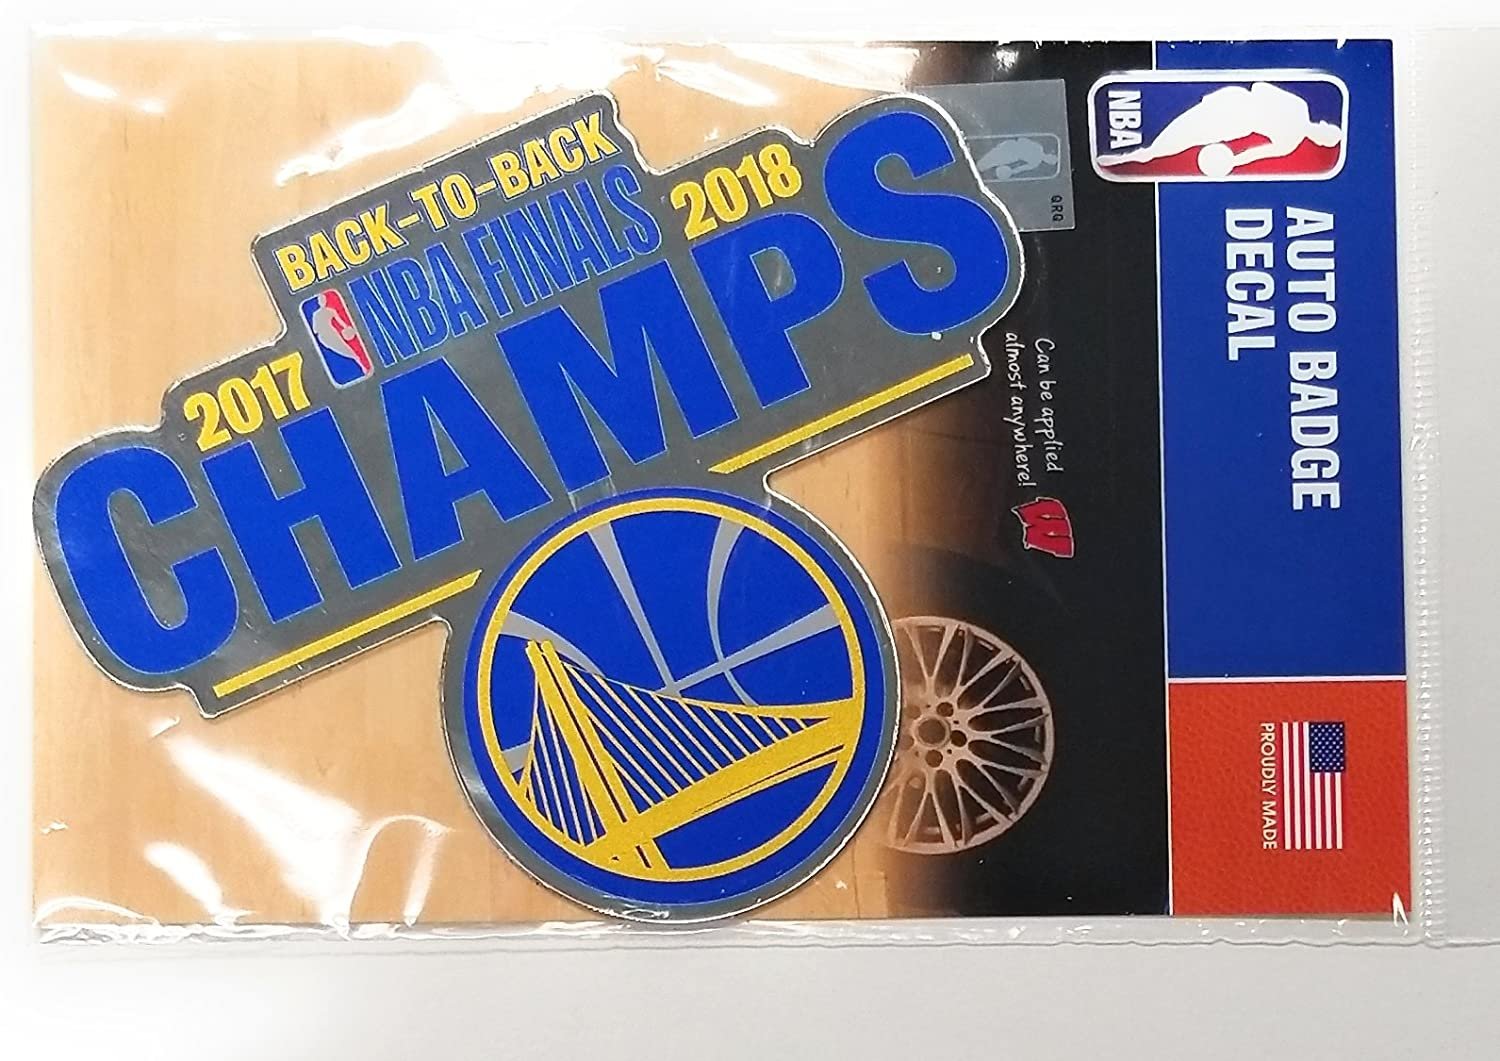 Golden State Warriors 2018 Champions Premium Color Auto Badge Decal Emblem WC 26280207 Raised Color Decal Basketball